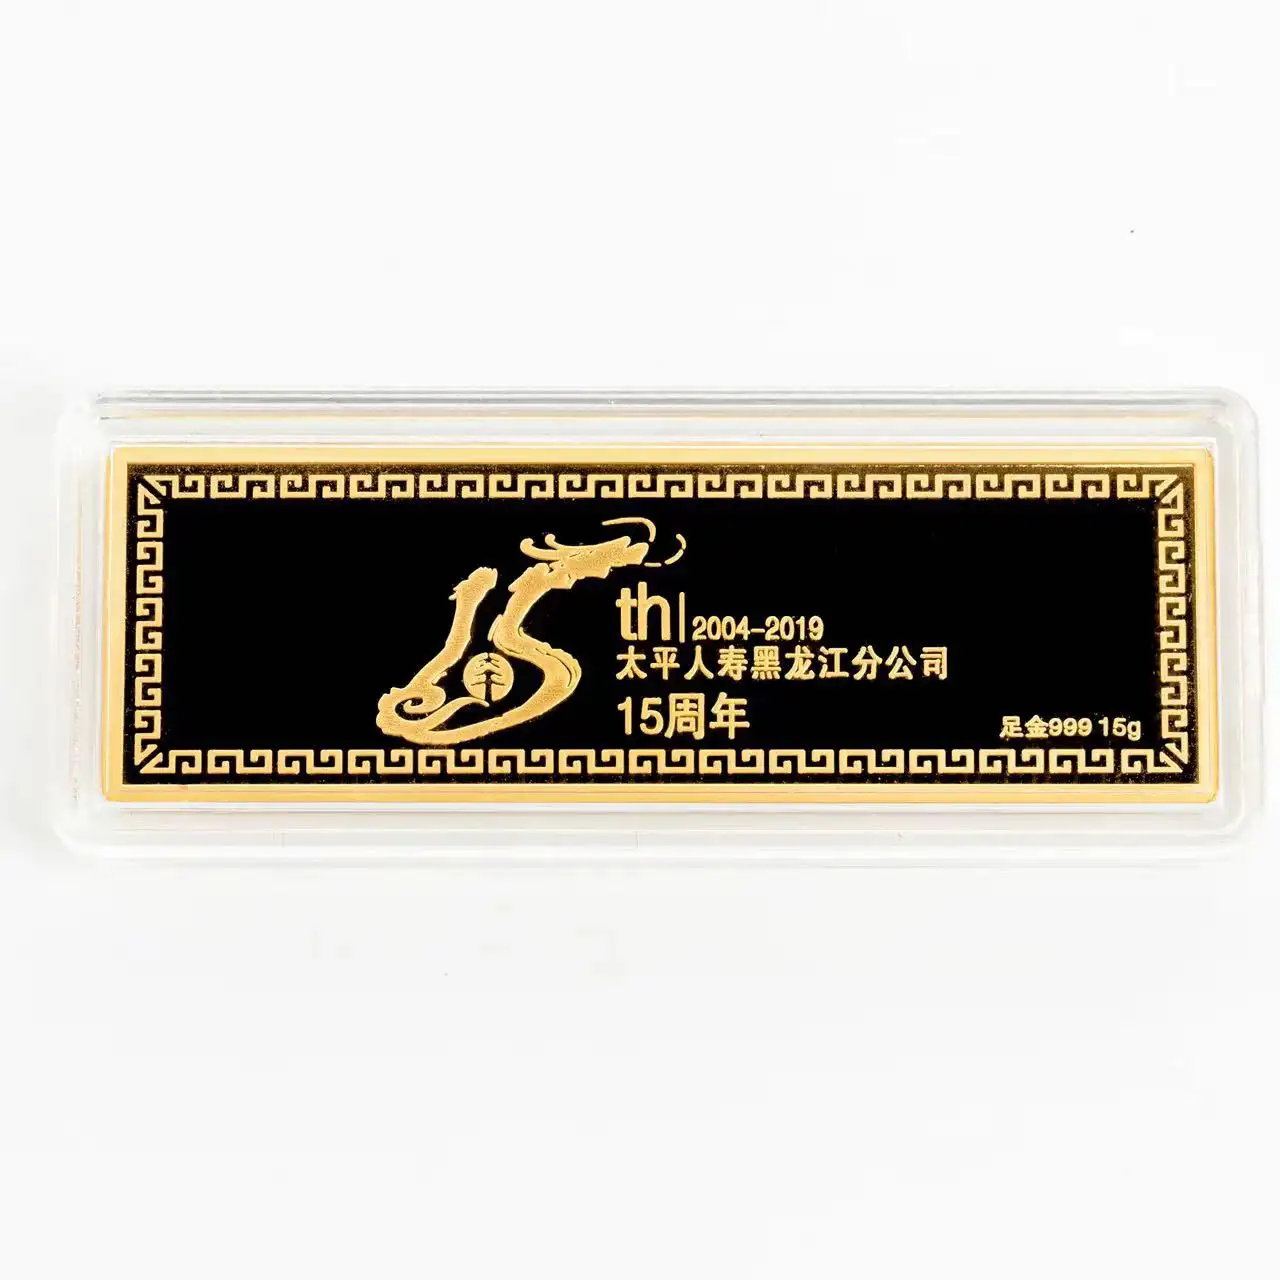 Engraving gold bars, pure gold customization, passed professional quality inspection 999 gold 24k